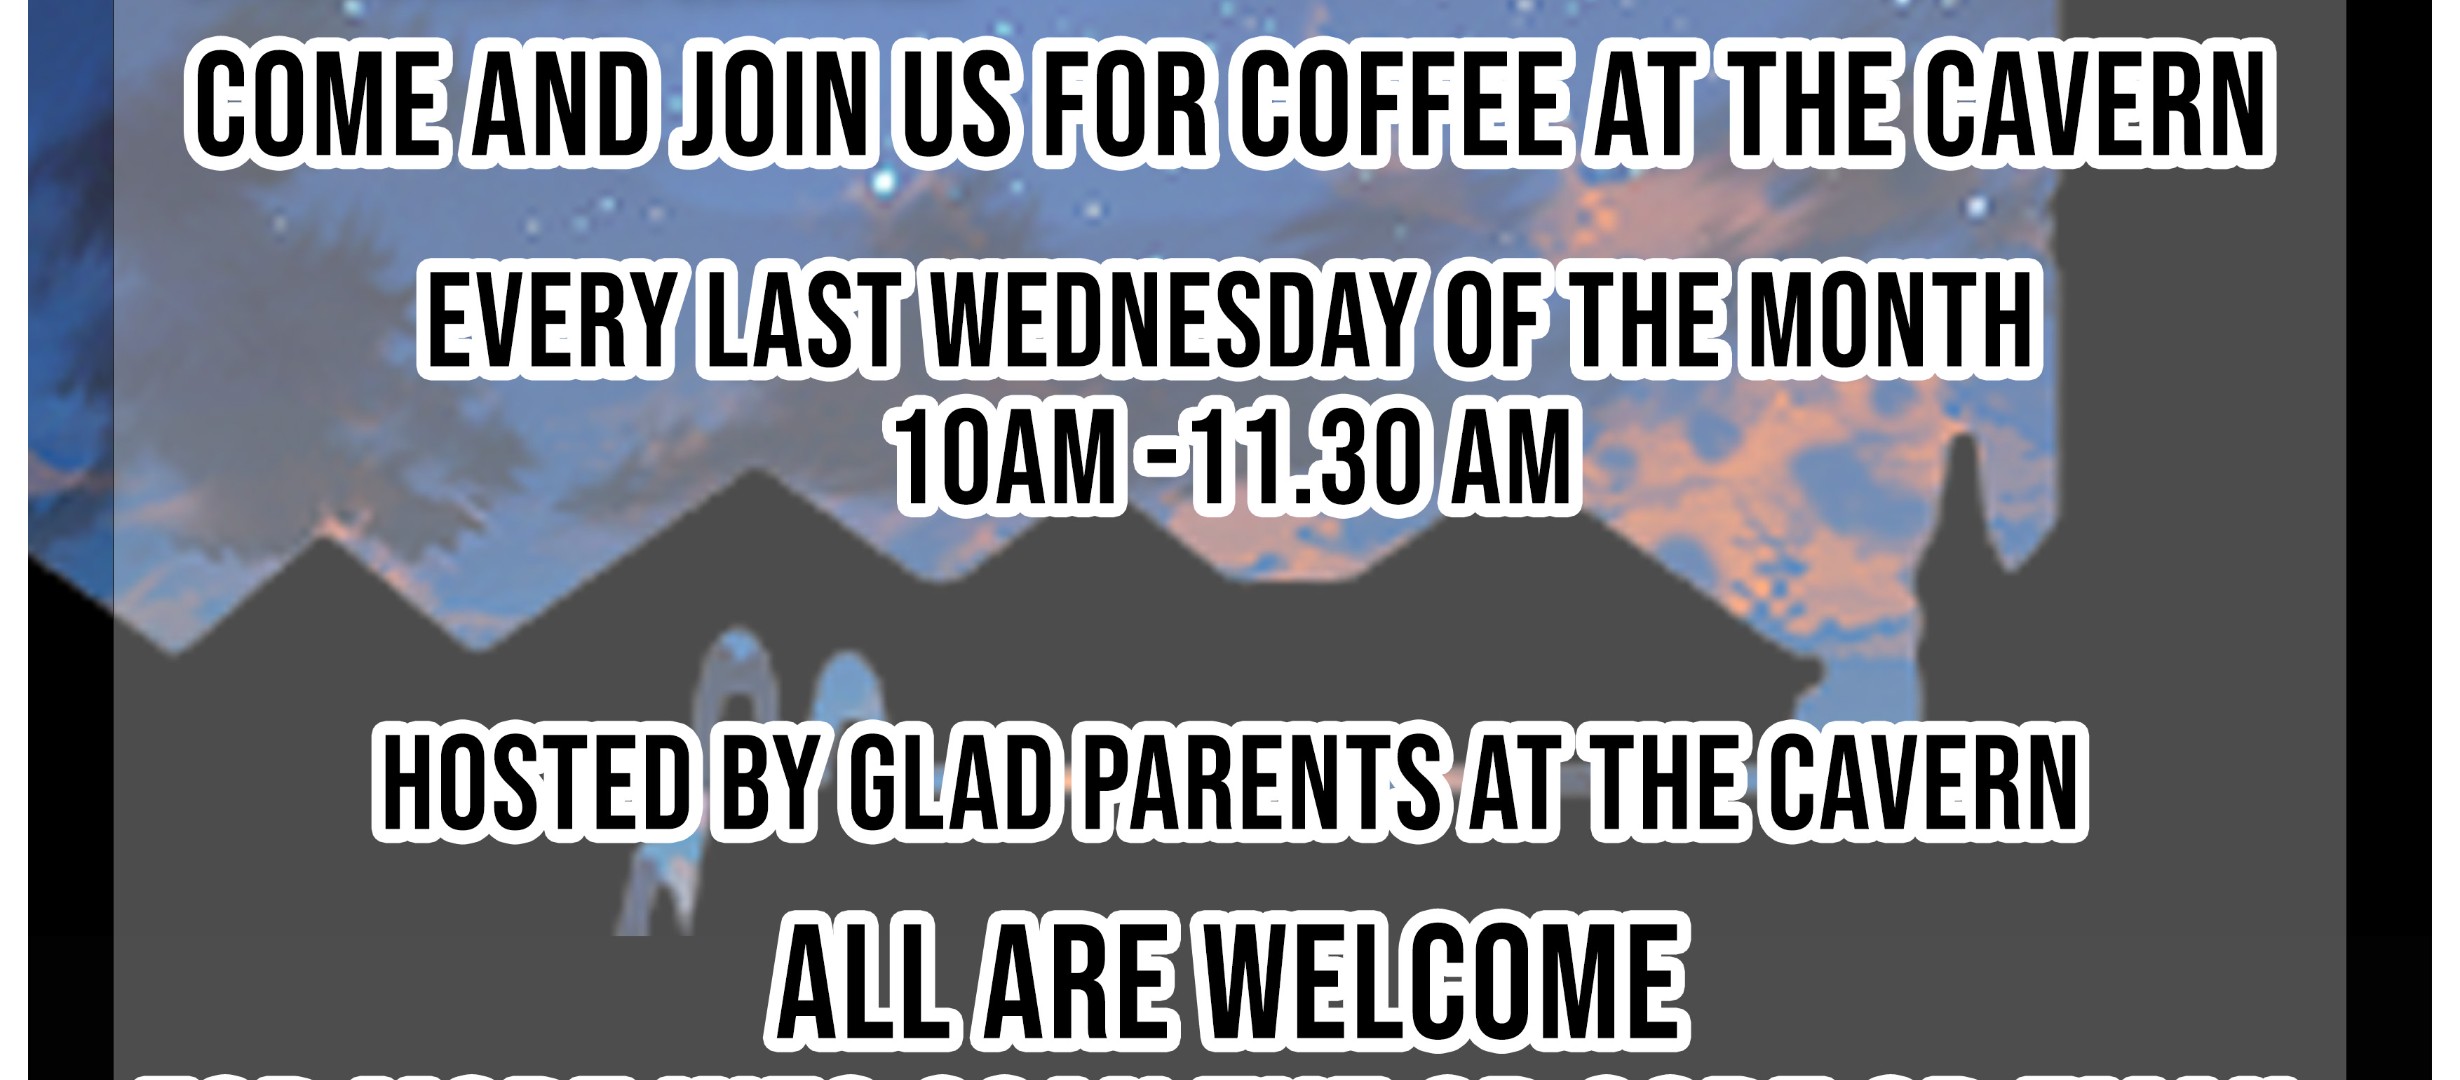 come and join us for coffee at the cavern every last wednesday of the month 10 am - 11.30 am